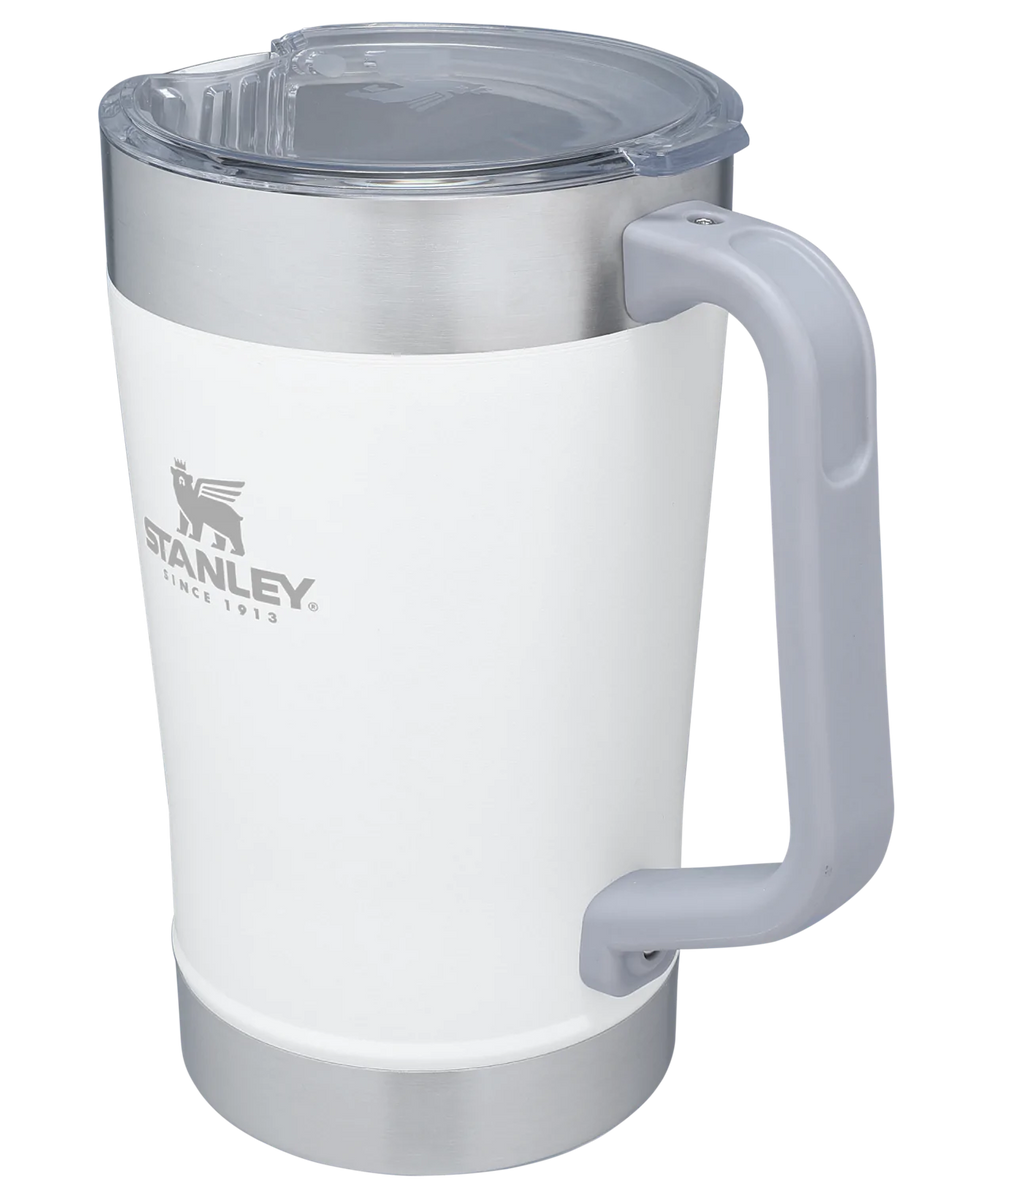 Stanley Stay-Chill Classic Pitcher Set - Hammertone Green, For the  Outdoorsman